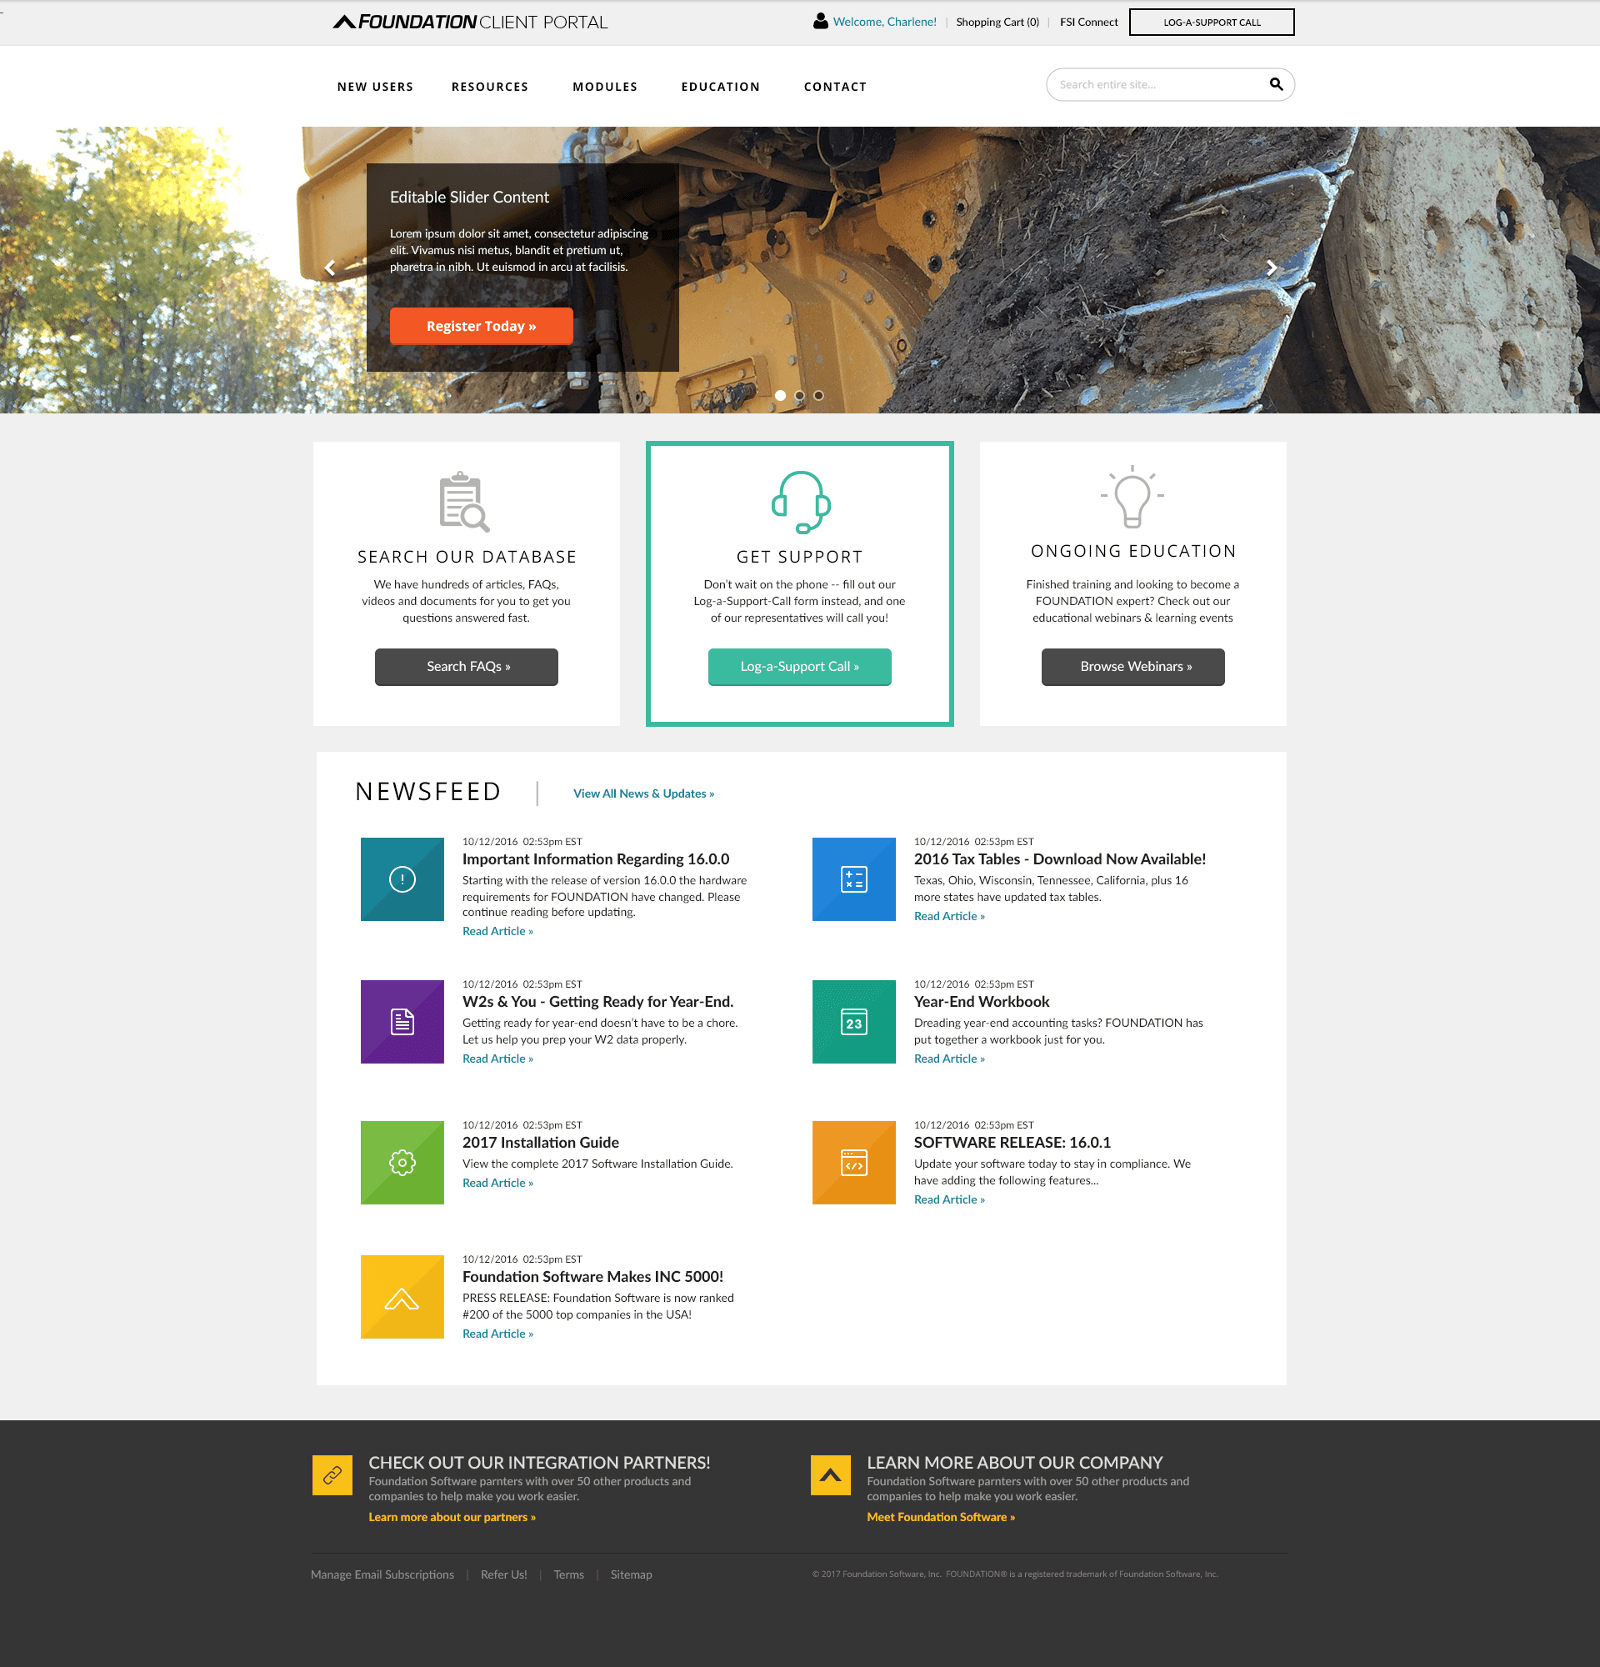 Final design of the website for Landing Page